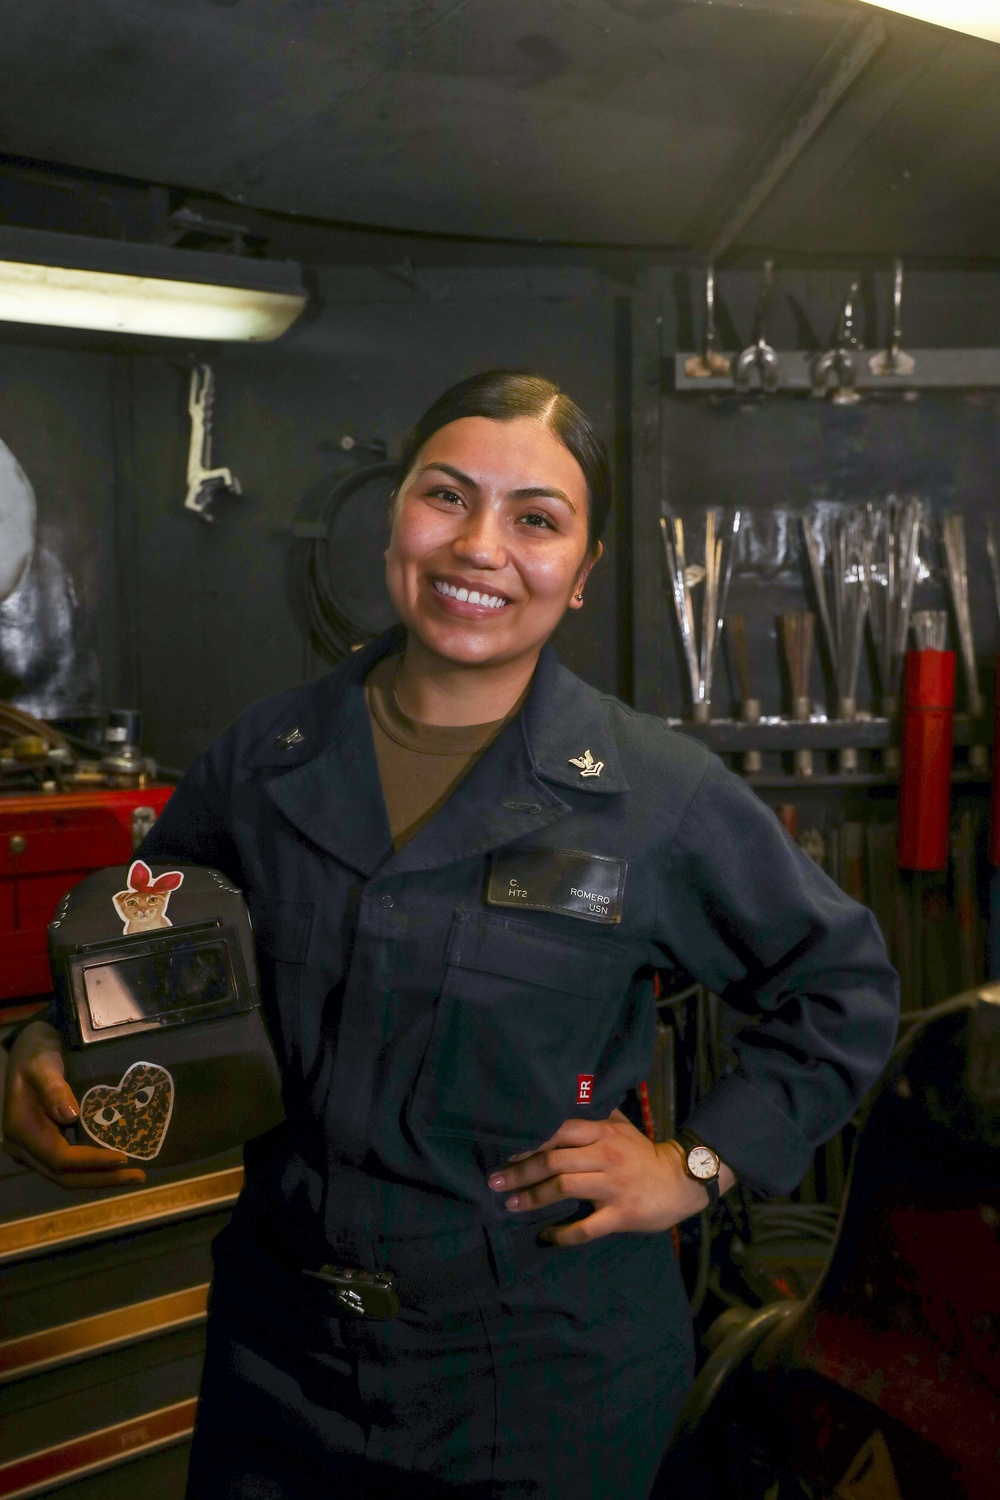 Hull Technician Clarissa Romero poses for a photo aboard the aircraft carrier USS Abraham Lincoln (CVN 72).